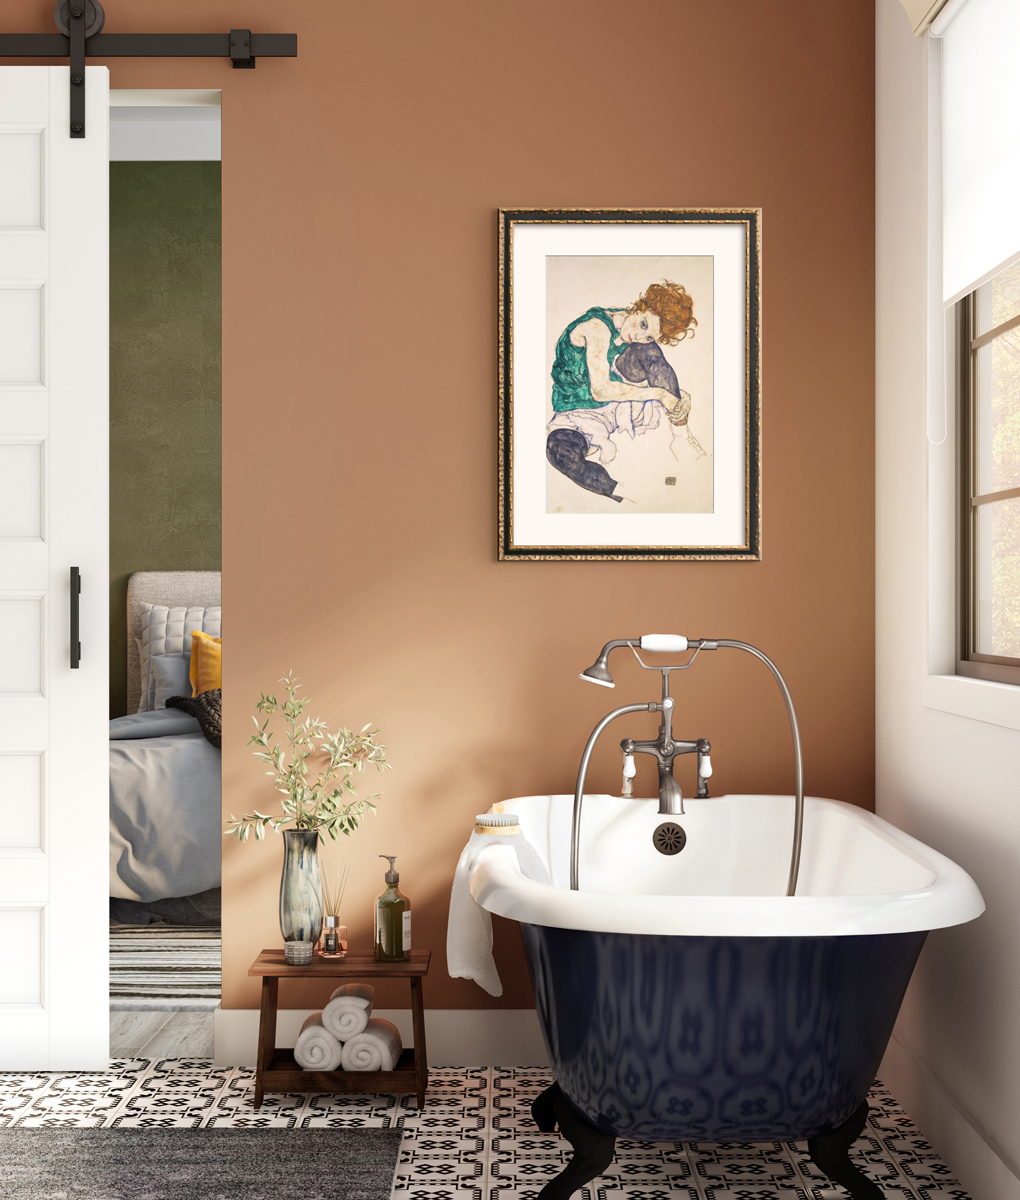 Bathroom with a painting hung above the tub